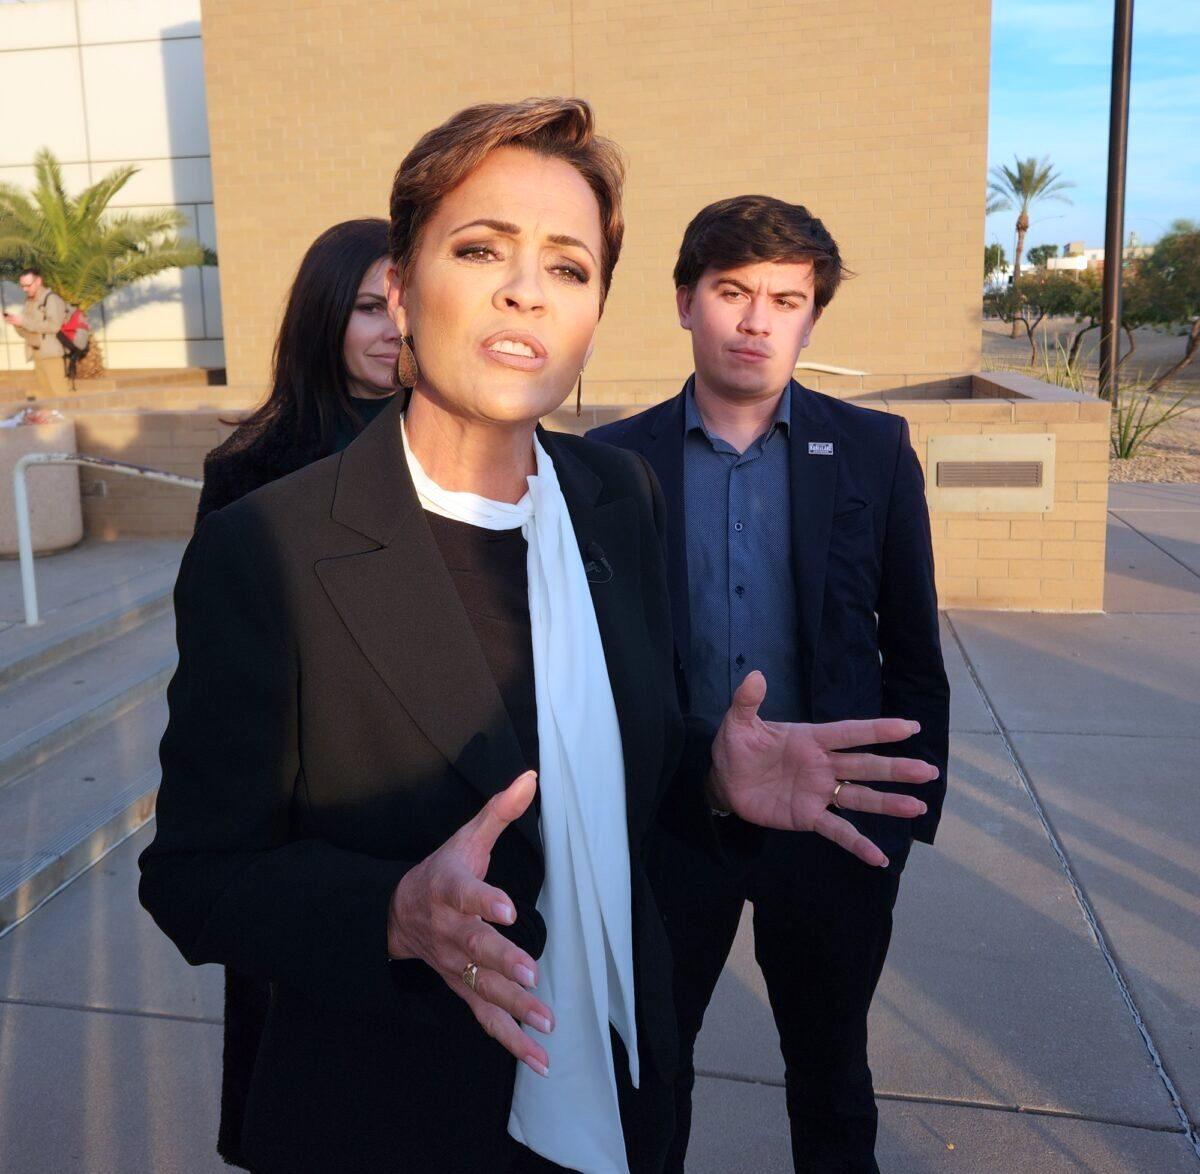 Following two days of testimony in a civil case she filed seeking to overturn the Nov. 8 general election, Arizona Republican gubernatorial candidate Kari Lake addresses the media outside the Superior Court of Maricopa County, Ariz., on Dec. 22, 2022. (Allan Stein/The Epoch Times)